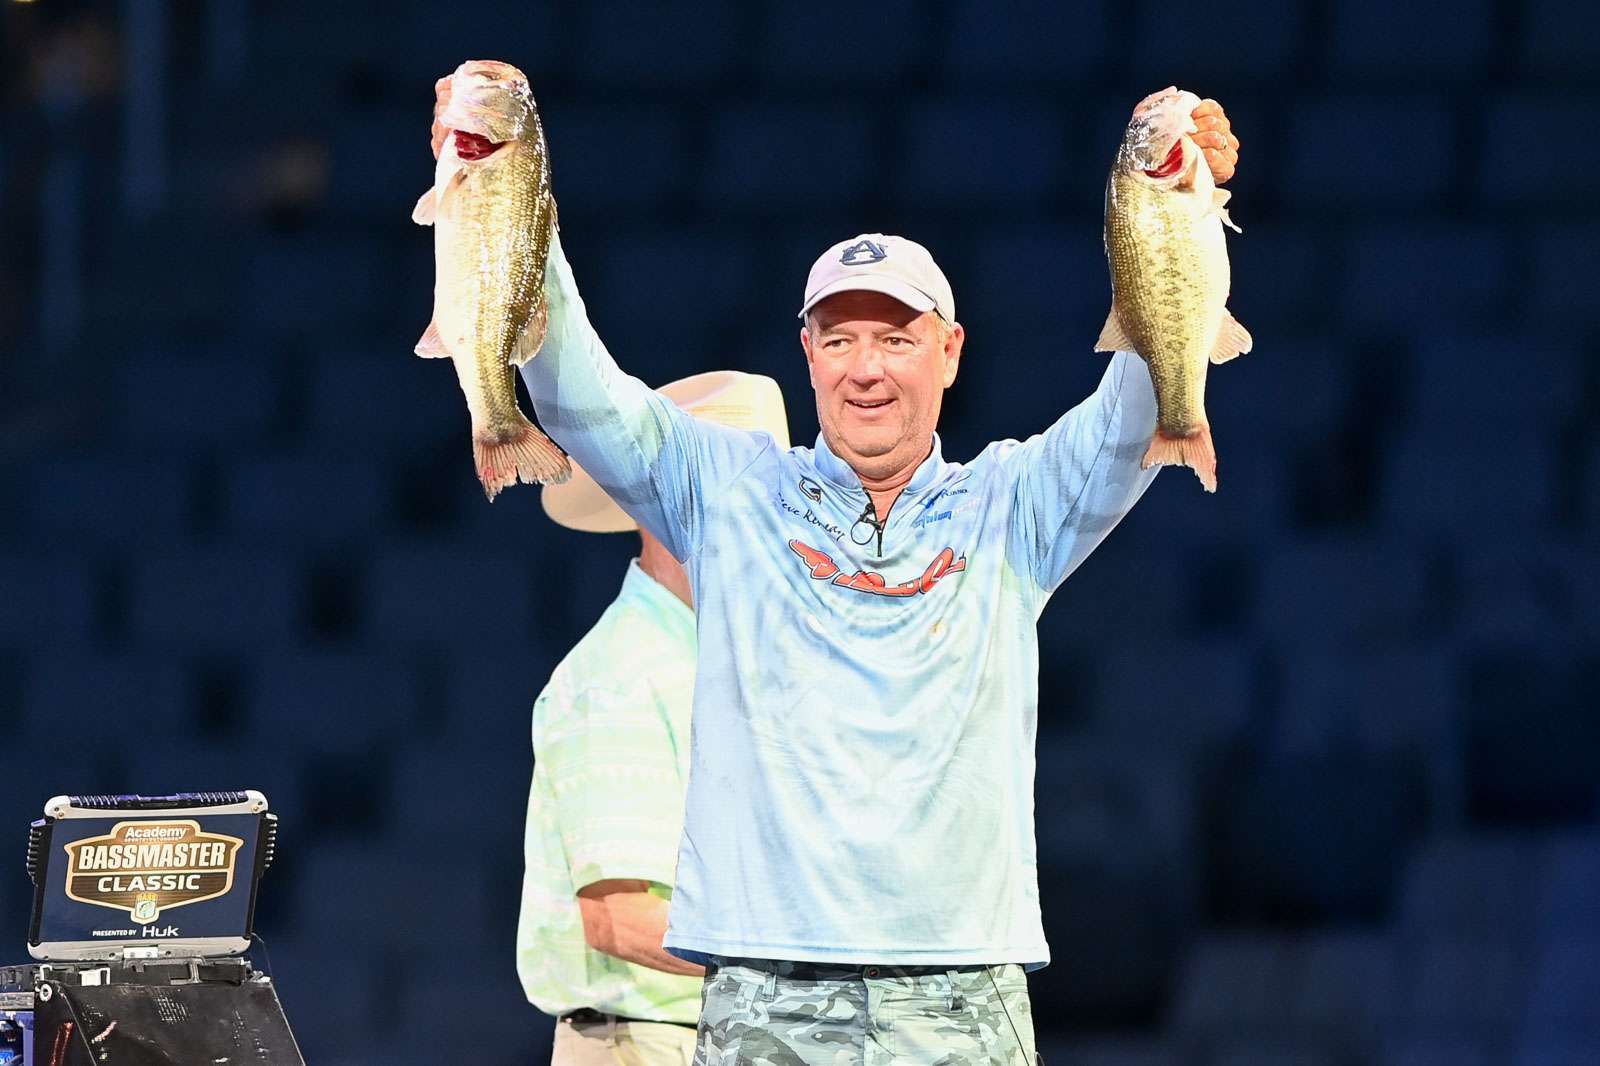 Steve Kennedy, who finished second in the 2017 Classic on Lake Conroe in southern Texas, had a stellar first day, including several 4-pounders before a 5-10 helped him to 23-0 and the lead. However, the fickle nature of Ray Roberts struck Kennedy on Day 2. A lightning storm delayed blastoff more than two hours and seemed to stall Kennedy, who missed filling his limit with a late monster he had on the line and fell to third place.